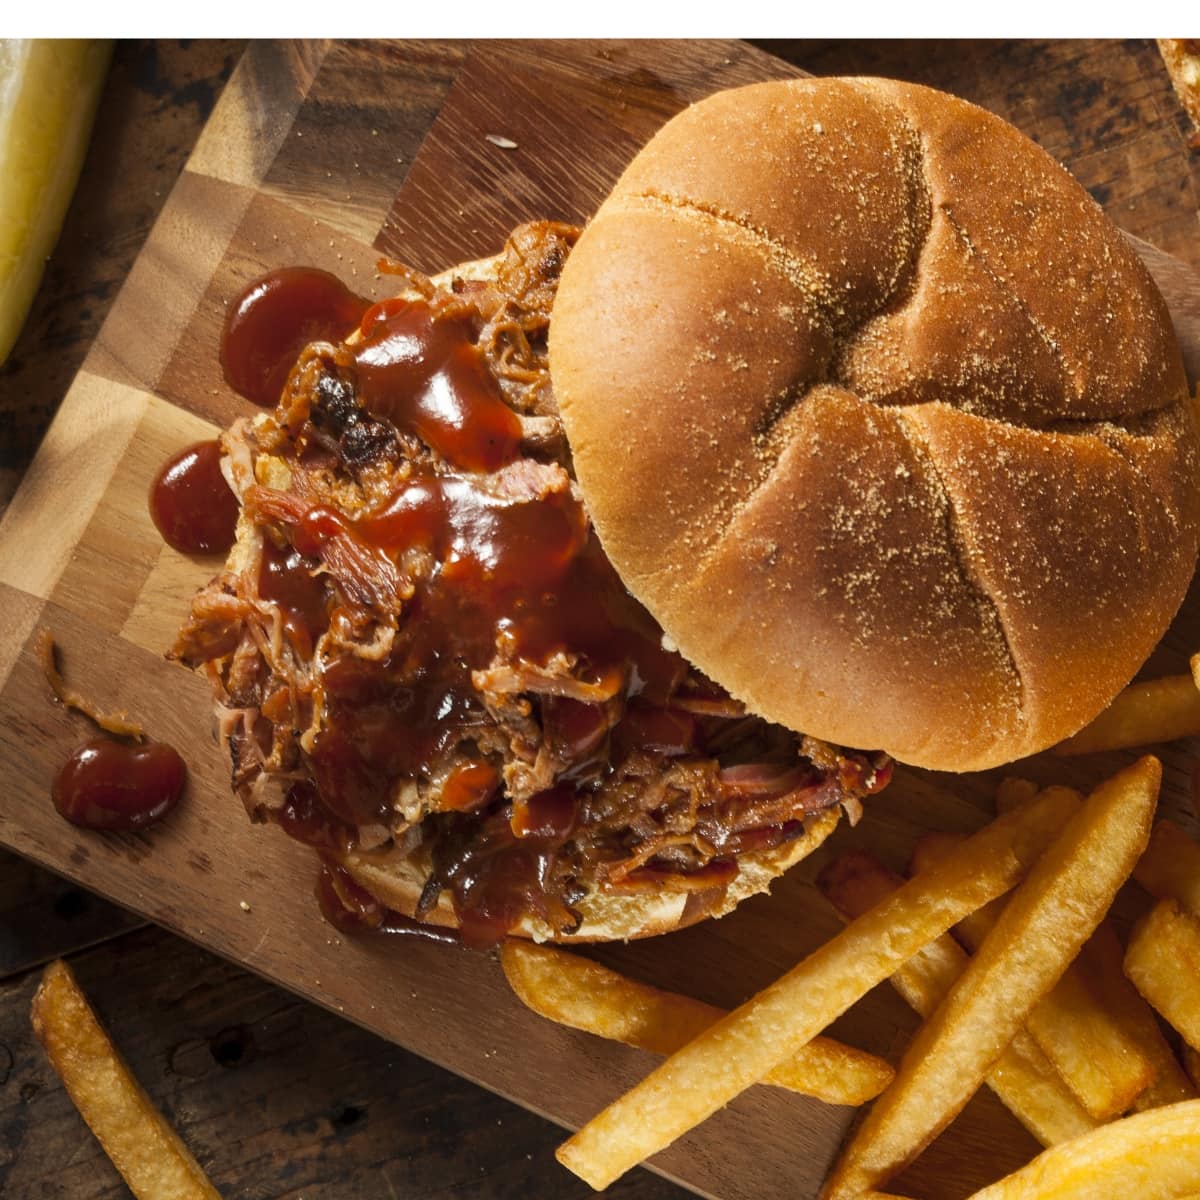 Top view of Dr. Pepper Pulled Pork with fries on a wooden cutting board